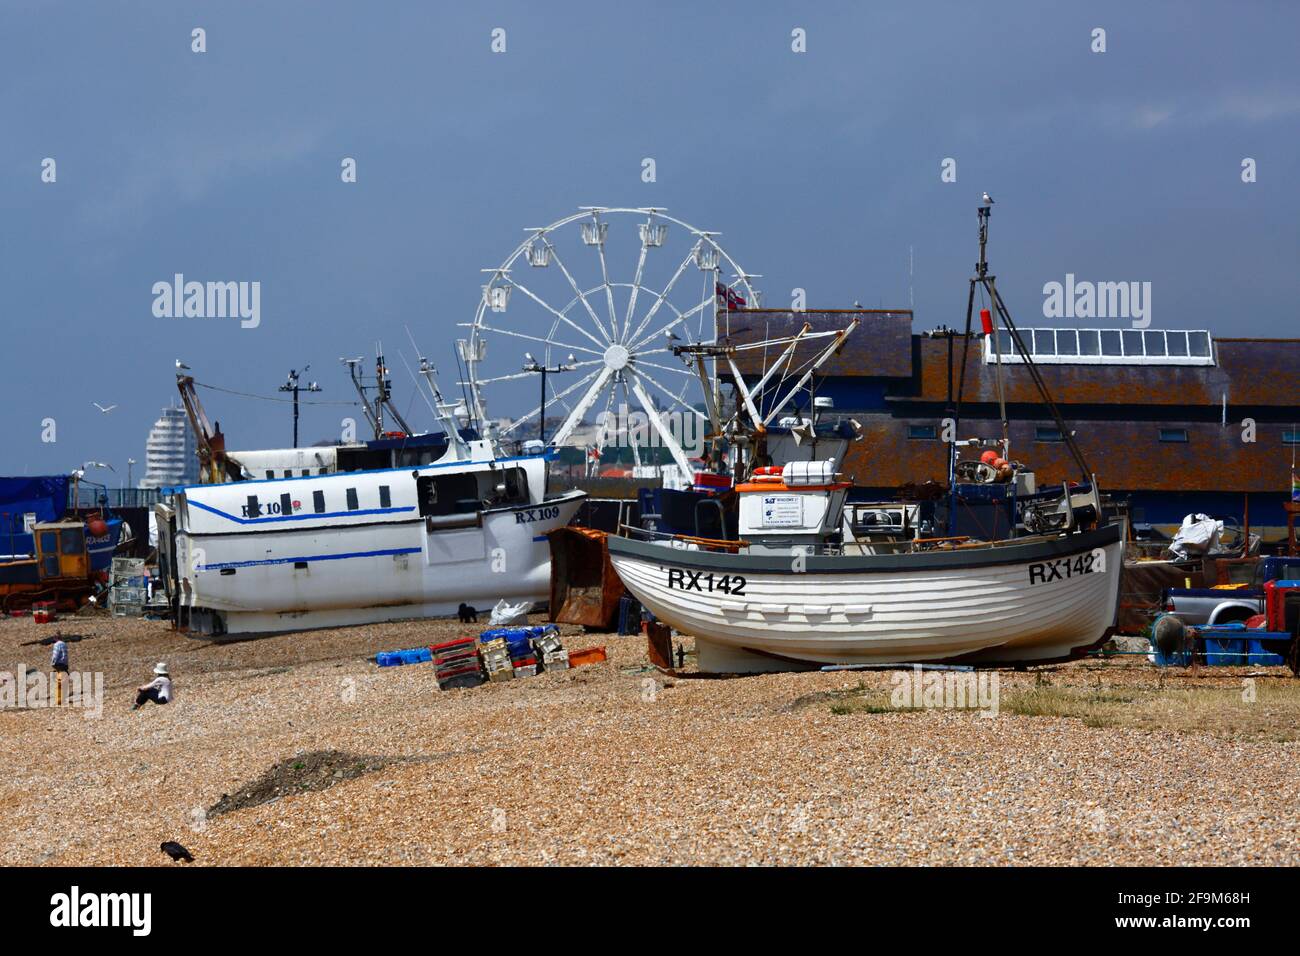 Fishing boats on The Stade shingle beach, Hastings Ferris Wheel in background, Hastings, East Sussex, England, UK Stock Photo